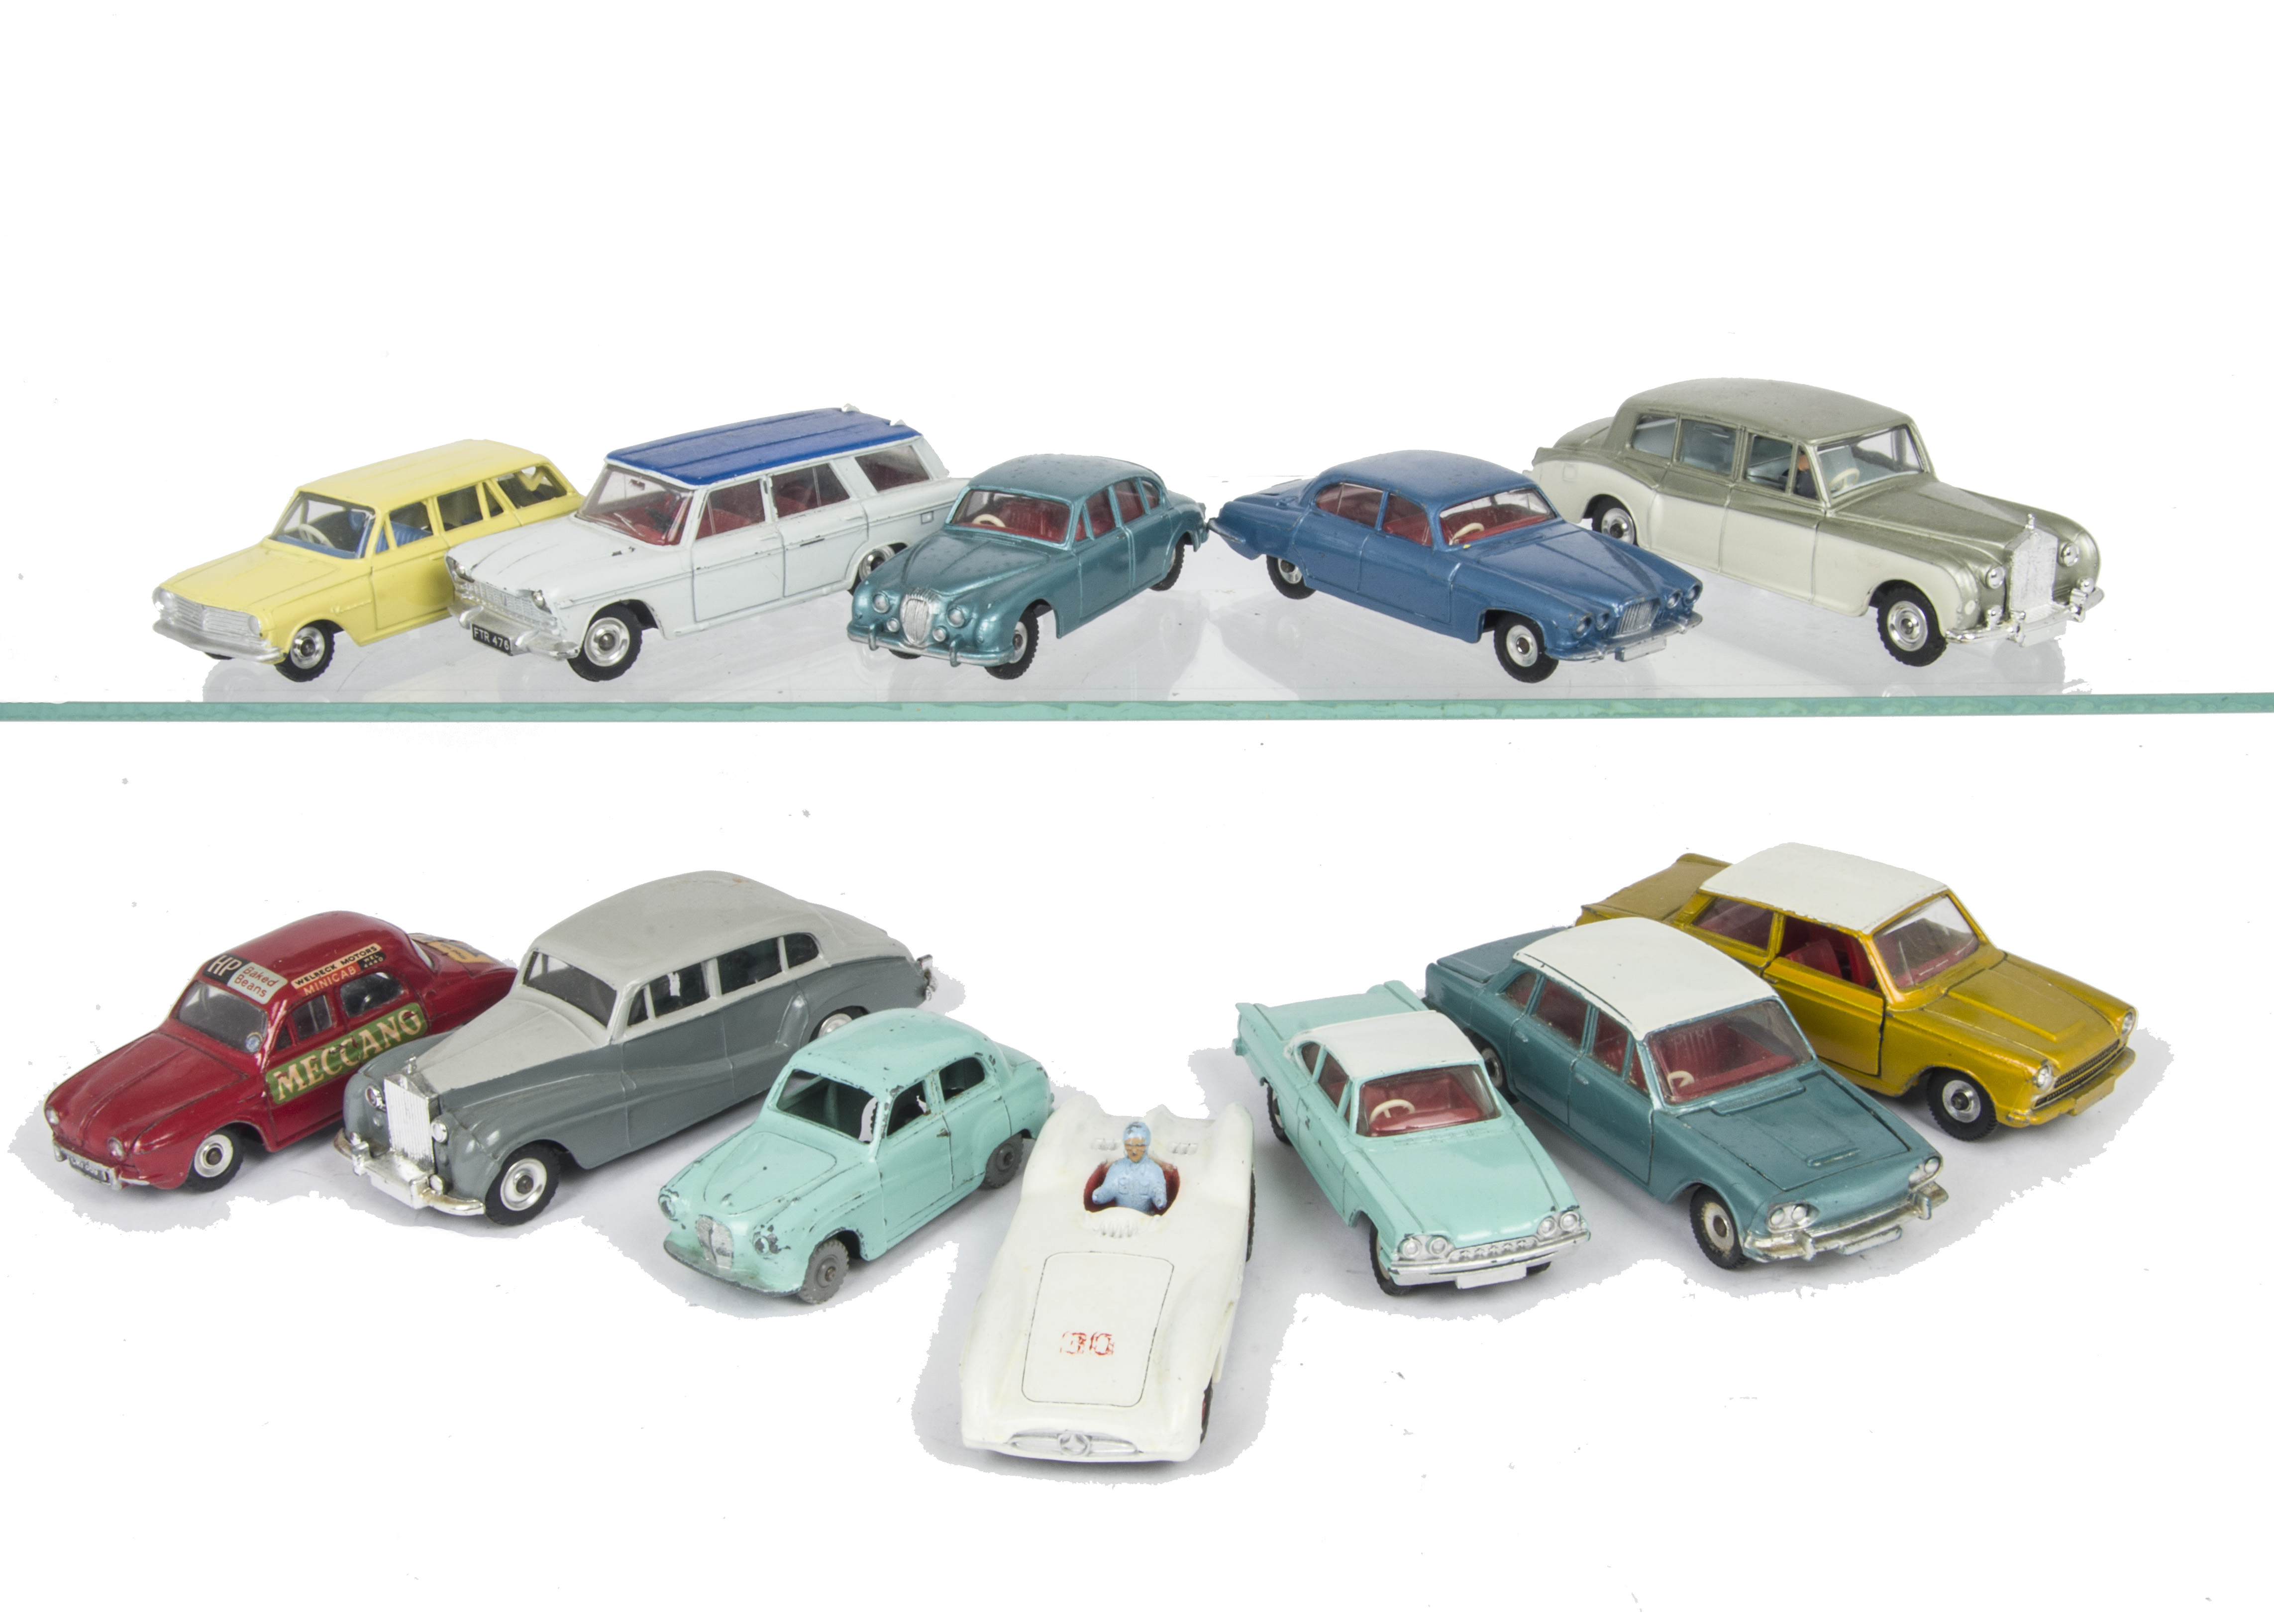 Loose Dinky Toy Cars, including 268 Renault Dauphine Mini Cab, 143 Ford Capri, 172 Fiat 2300, 150